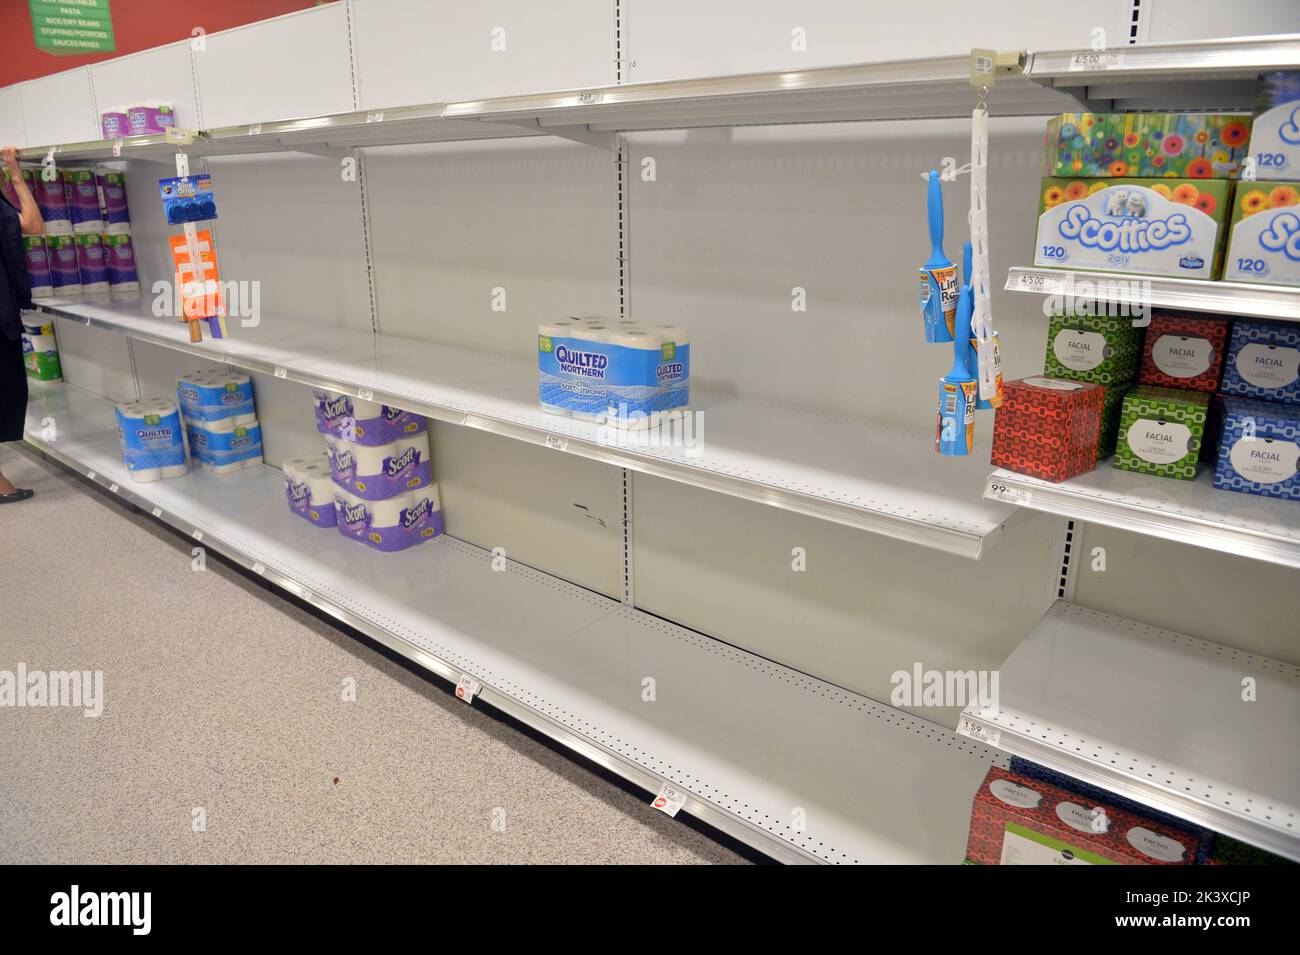 FORT LAUDERDALE, FL - SEPTEMBER 22, 2022: Hurricane Ian makes landfall in Florida as dangerous Category 4 hurricane. Historic File photos of Hurricanes in South Florida  People:  Publix Supermarket Stock Photo